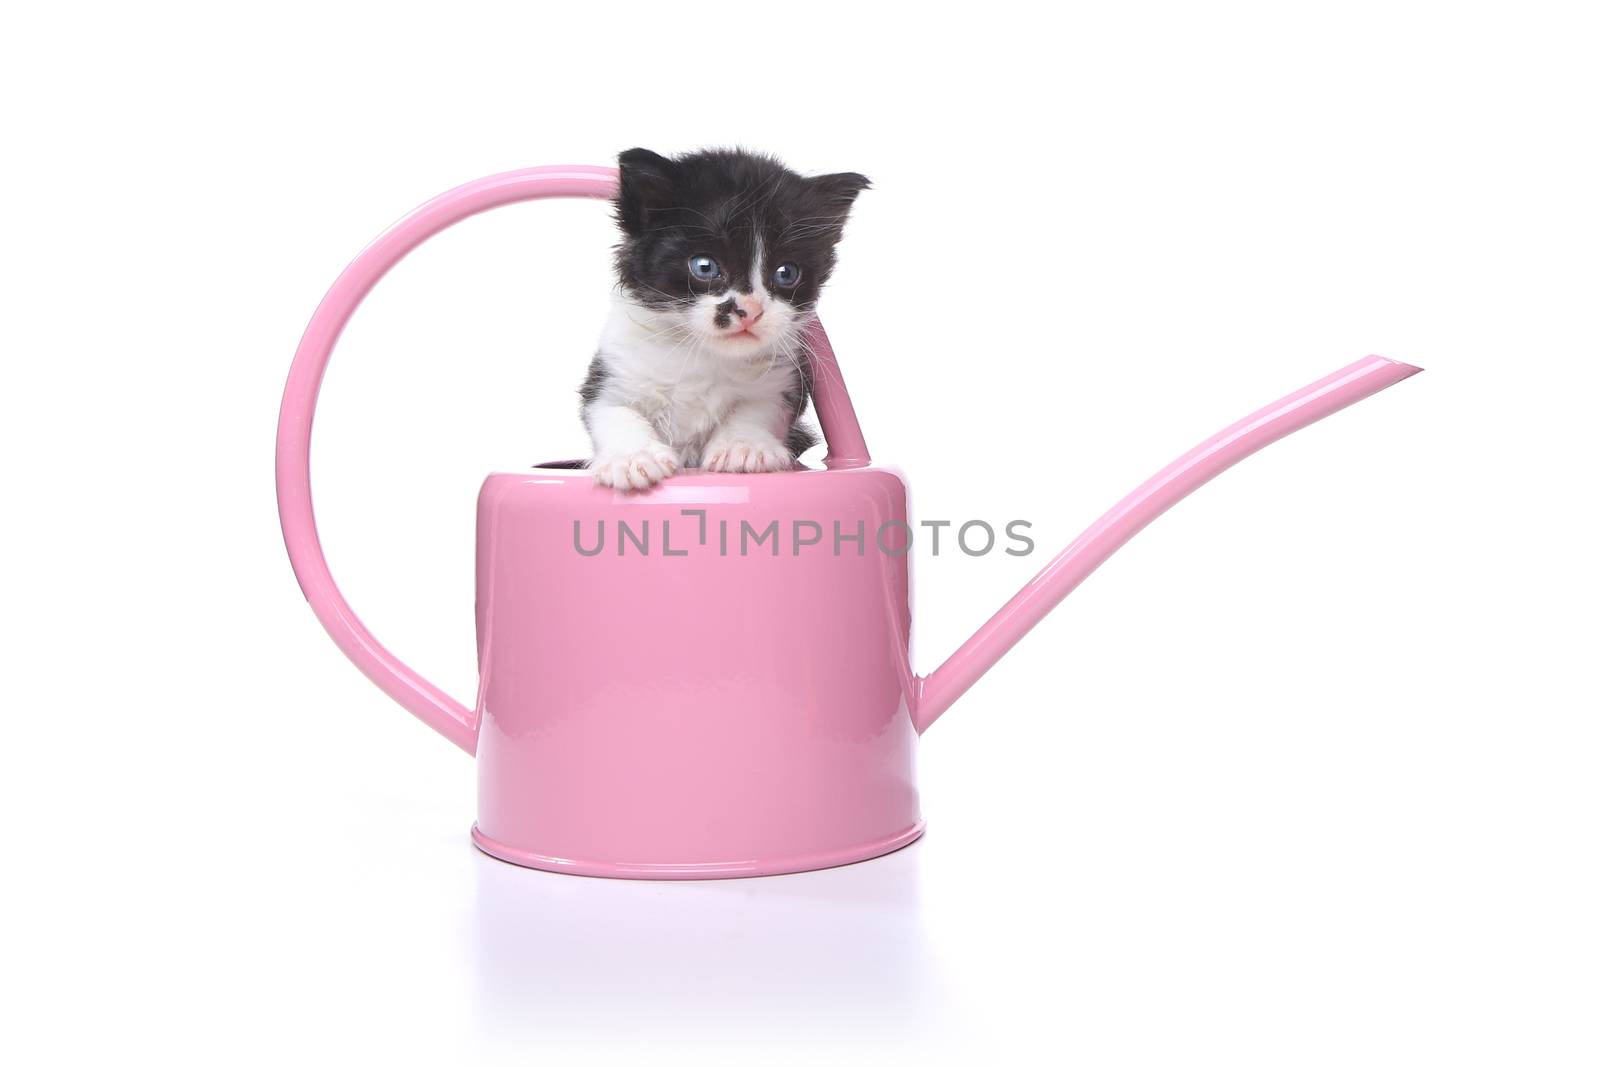 Adorable 3 week old Baby Kitten in a Garden Watering Can